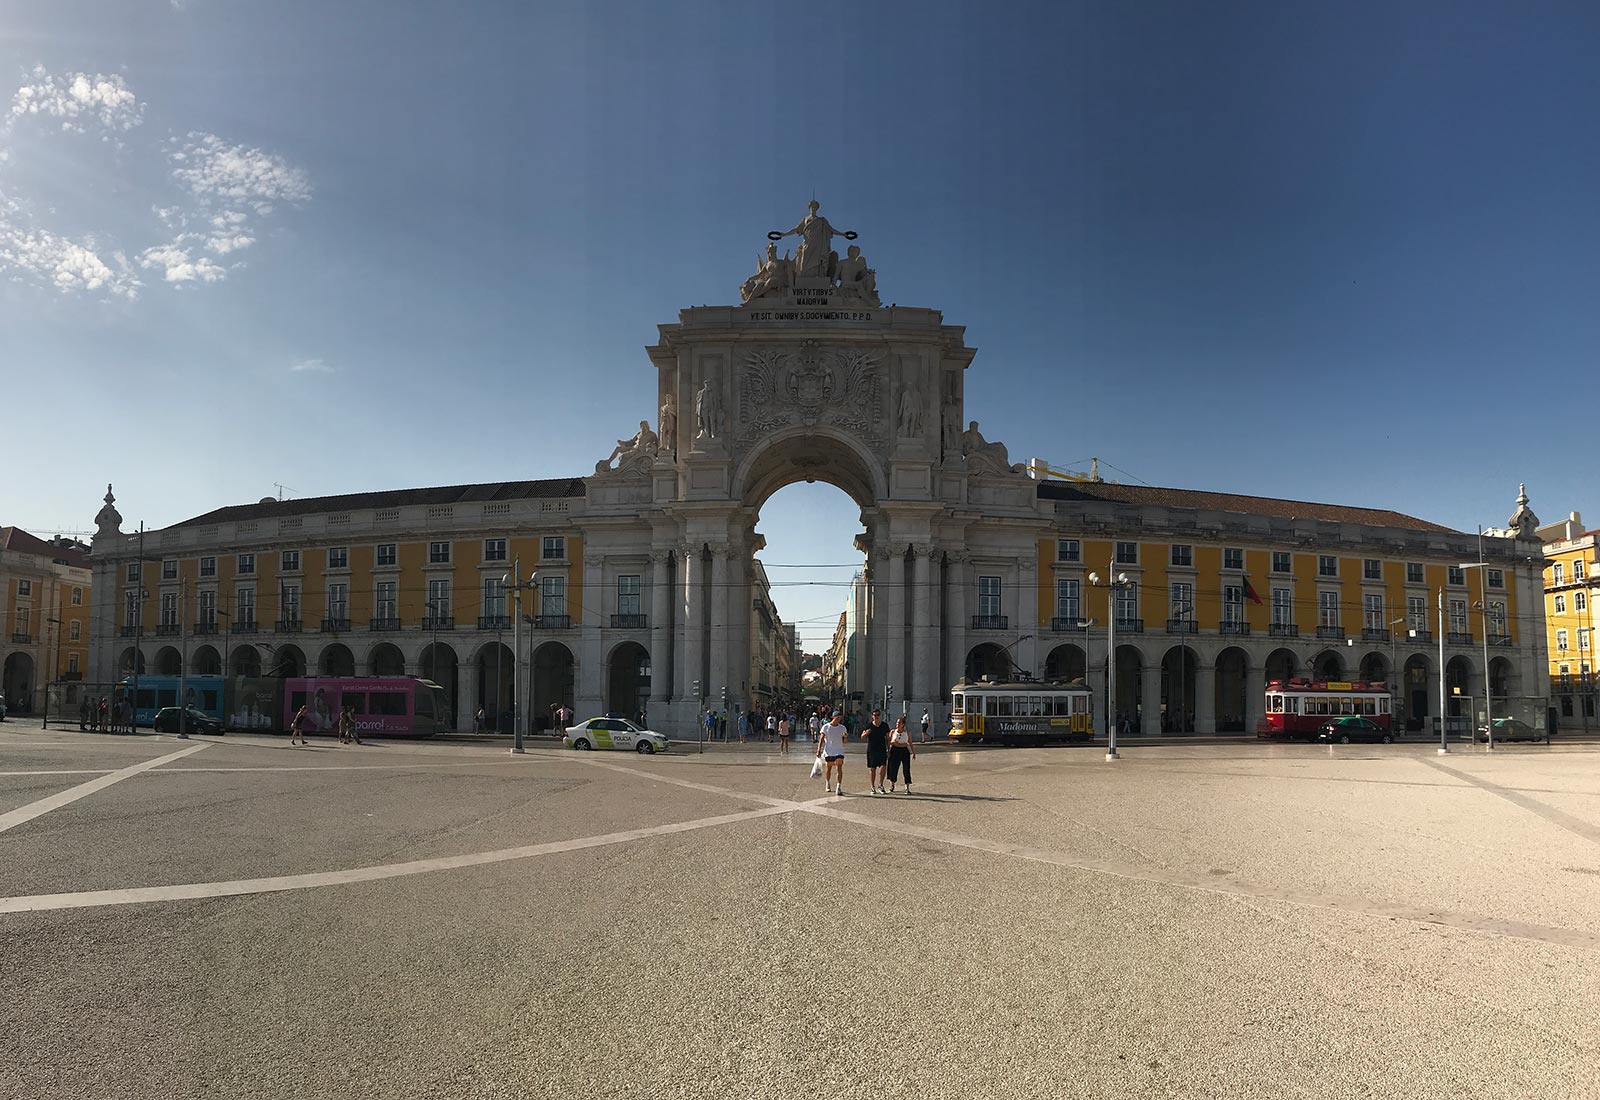 Stunning architecture in Lisbon, Portugal. Lisbon & Porto, where the blog was conceived